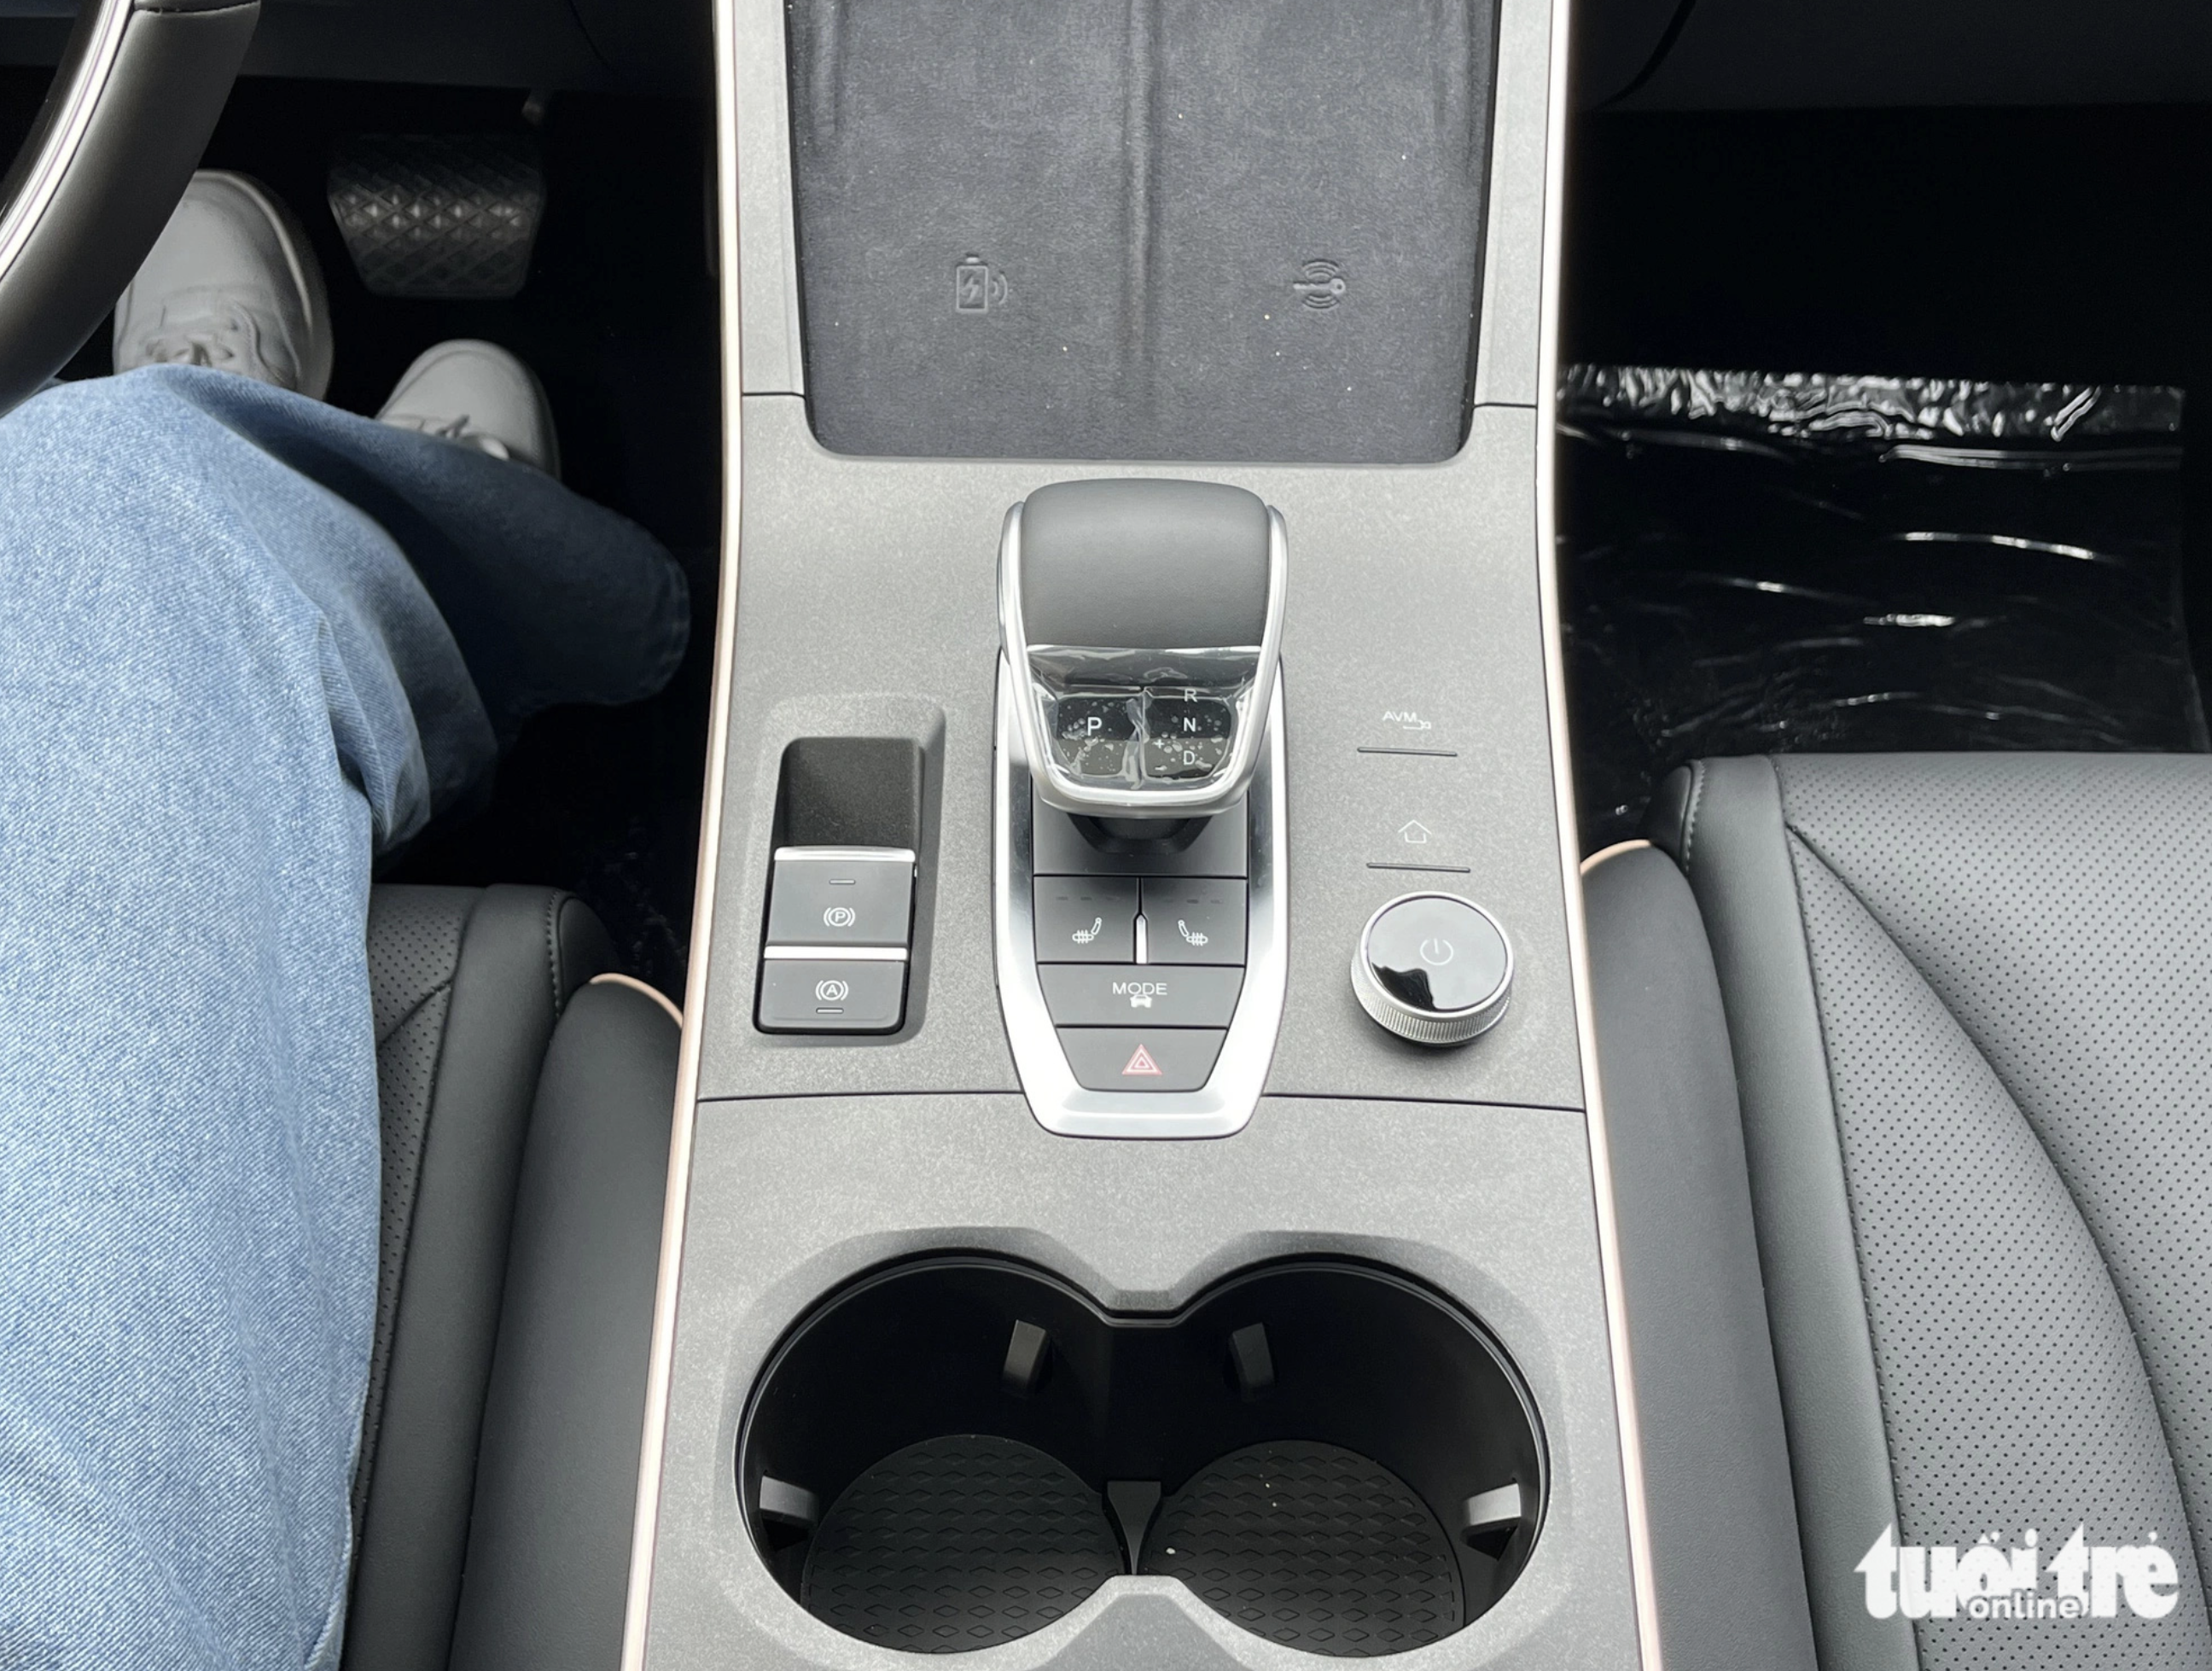 An electronic gearshift, functional keys, and a cooling system are located in the center console. The Omoda C5 enables in-car wireless smartphone charging. Photo: Tuoi Tre